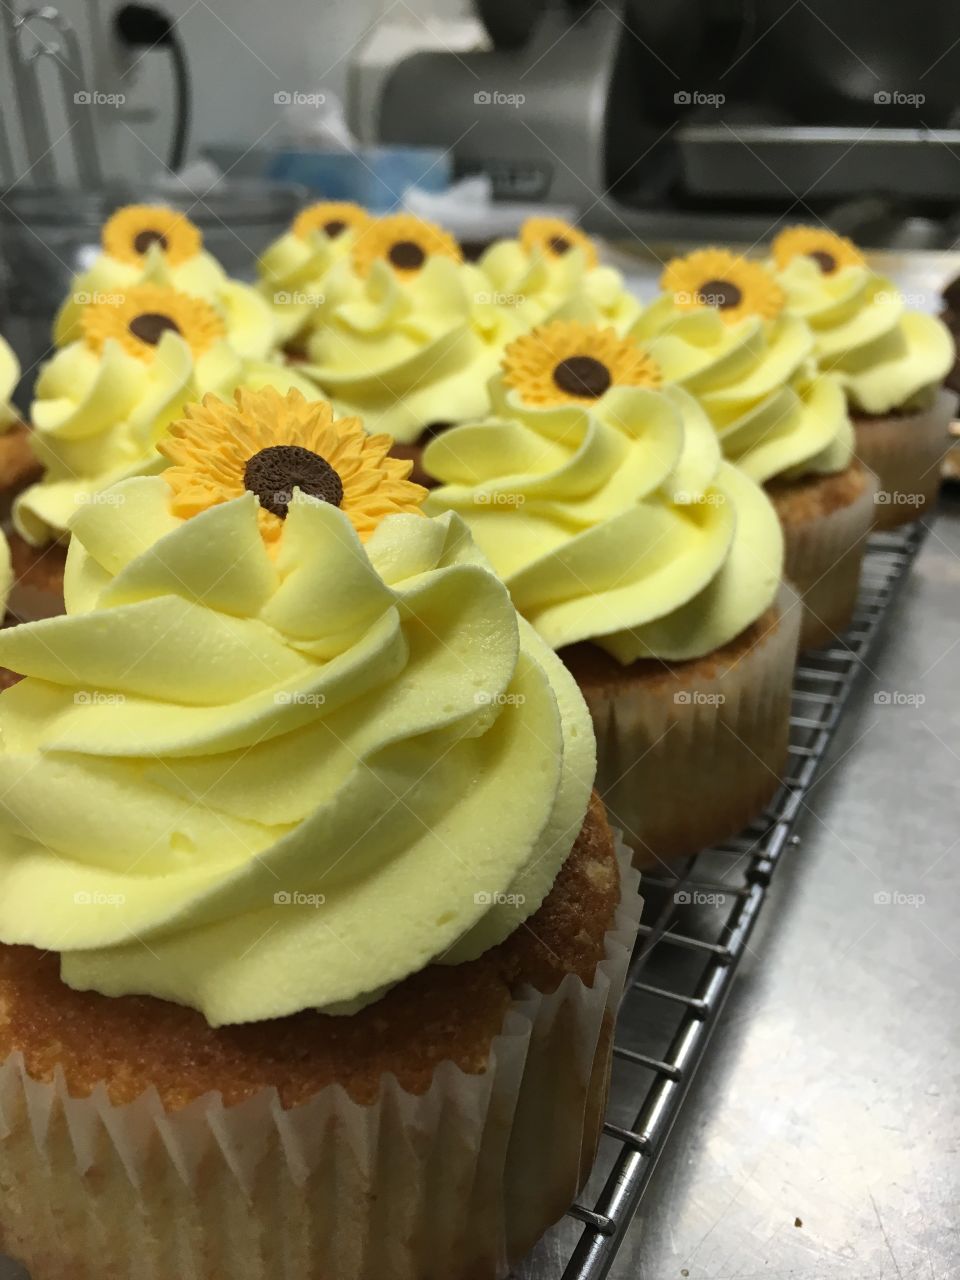 Bright lemon cupcakes with lemon frosting for a day filled with sun shine!